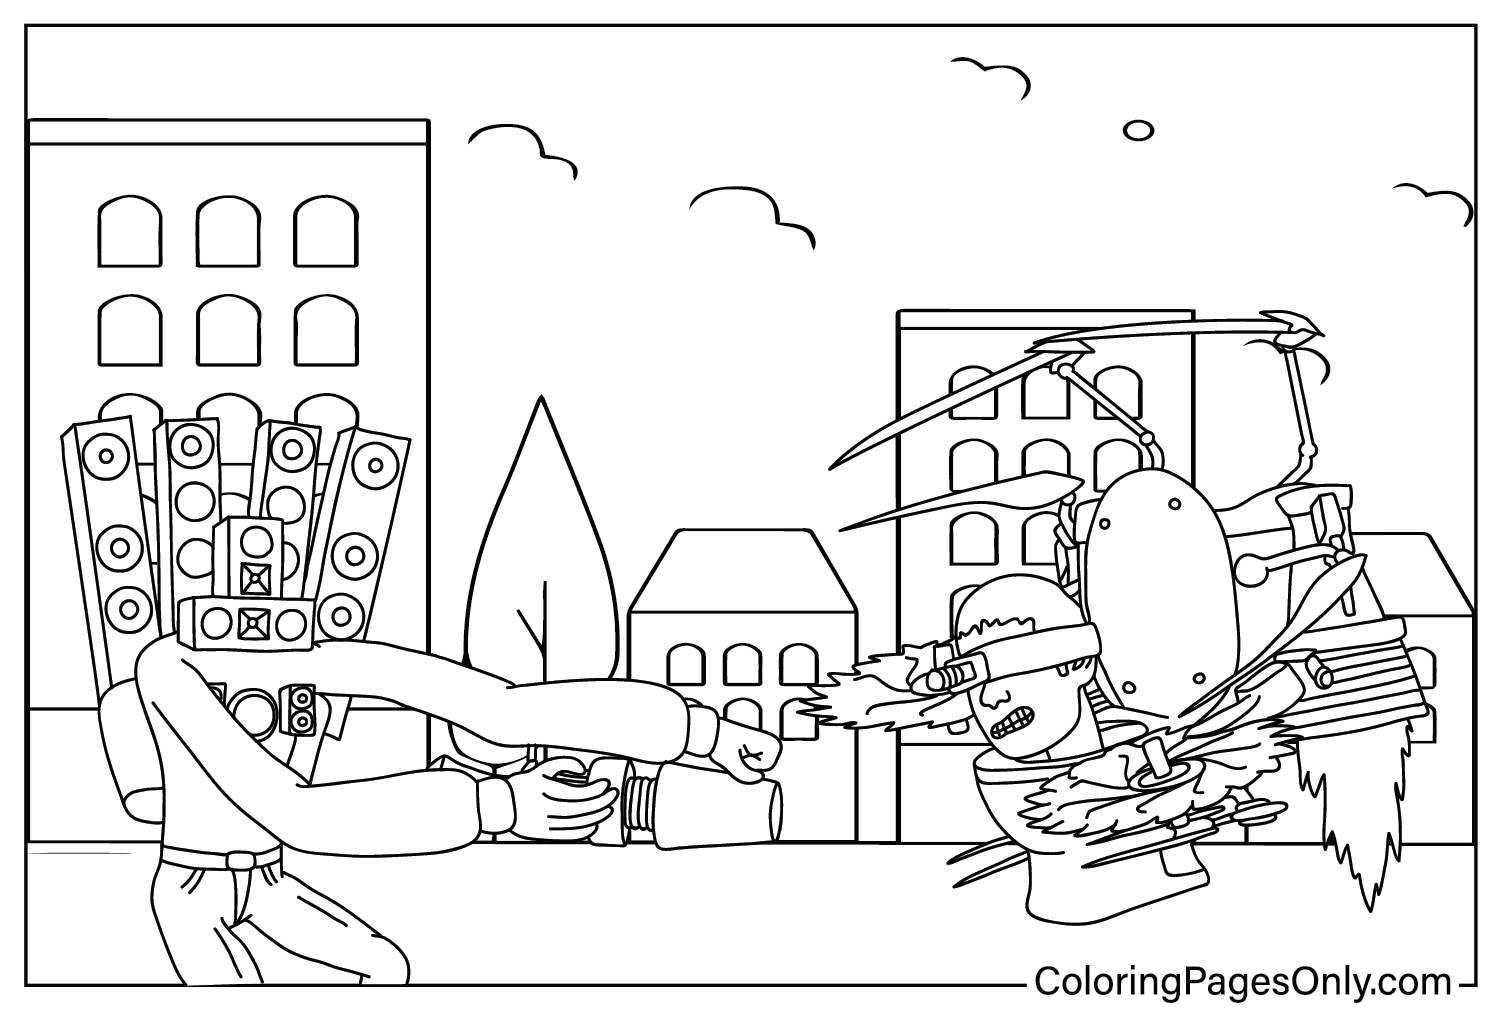 Dual Buzzsaw Mutant and Titan Speakerman Coloring Page from Dual Buzzsaw Mutant